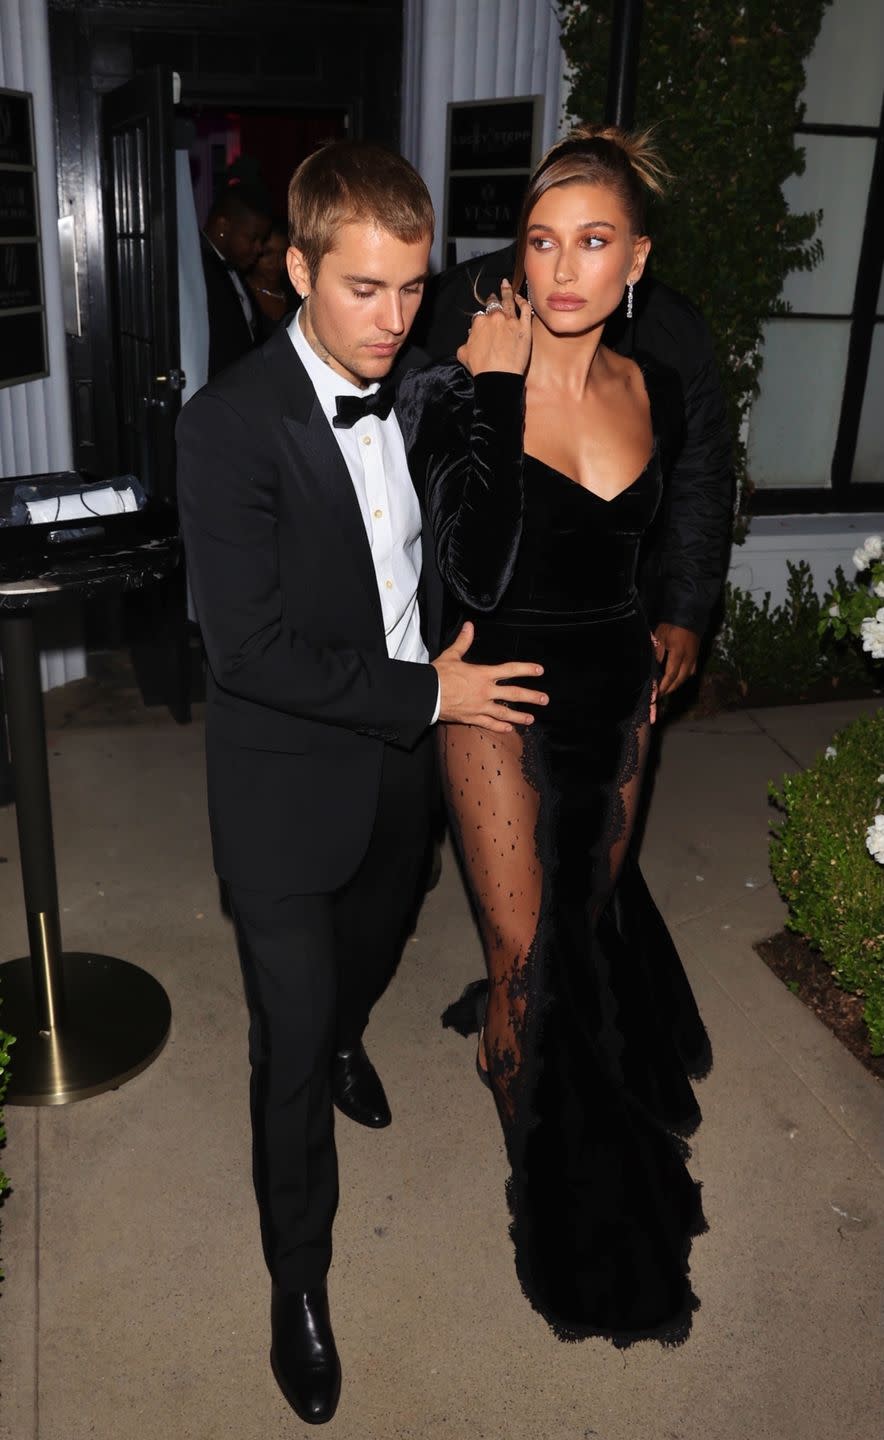 <p>The couple dressed in their best while in West Hollywood to celebrate the opening of Justin's art gallery auction, with Hailey wearing a velvet full-length gown with sheer lace panels, by Alessandra Rich. As they left the venue, Justin placed a protective hand on Hailey's hip as they navigated the awaiting photographers. </p>